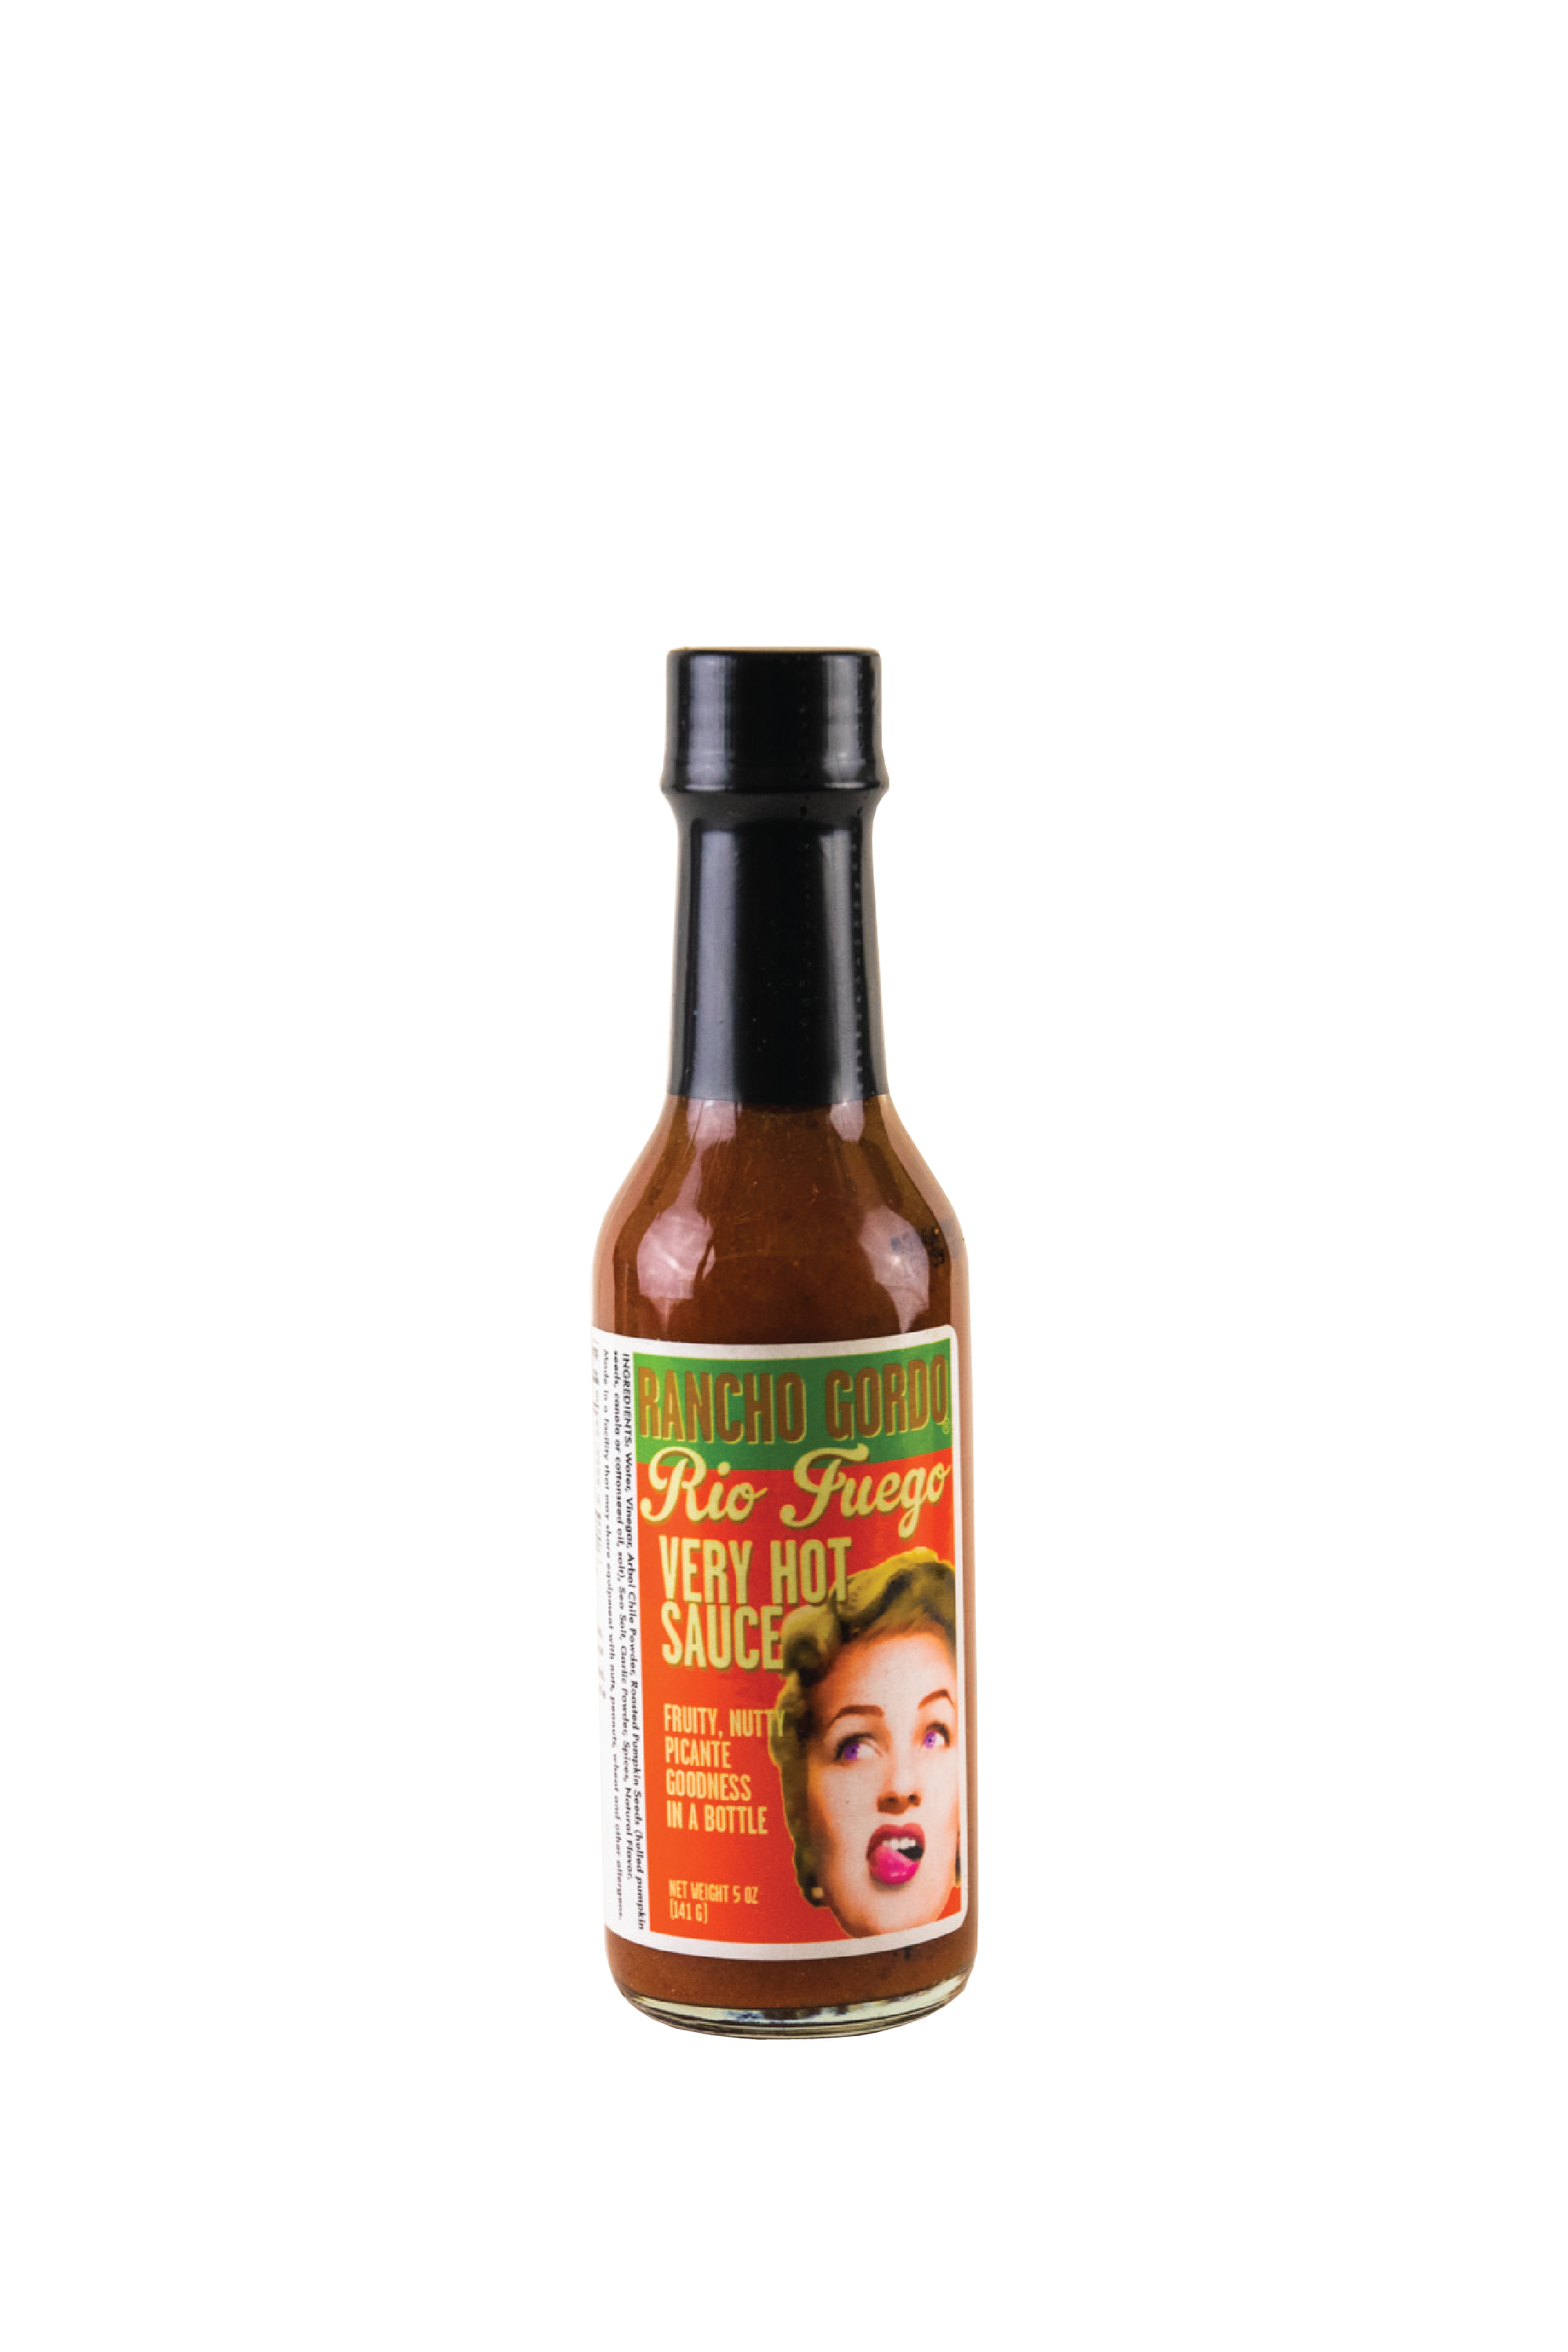 Image of a 5 oz bottle of Rancho Gordo Rio Fuego Very Hot Sauce on a white background. Green, yellow, and orange label with an image of the face of a woman licking her upper lip. Additional text on bottle reads: Fruity, nutty, picante goodness in a bottle.